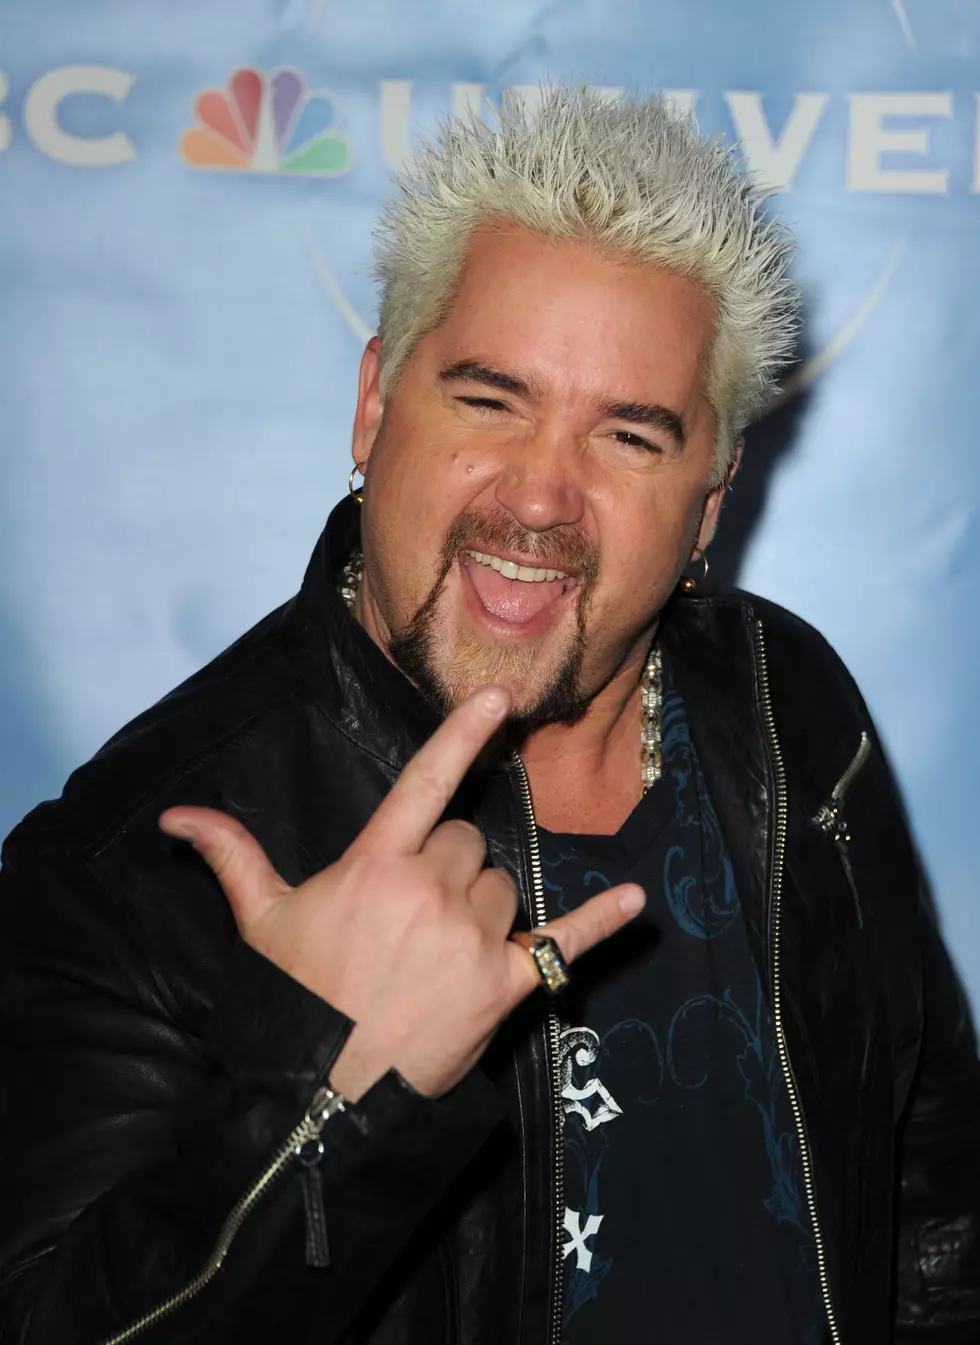 Food Network’s Guy Fieri Will Be Hosting Michigan/Michigan State Cook-Off!